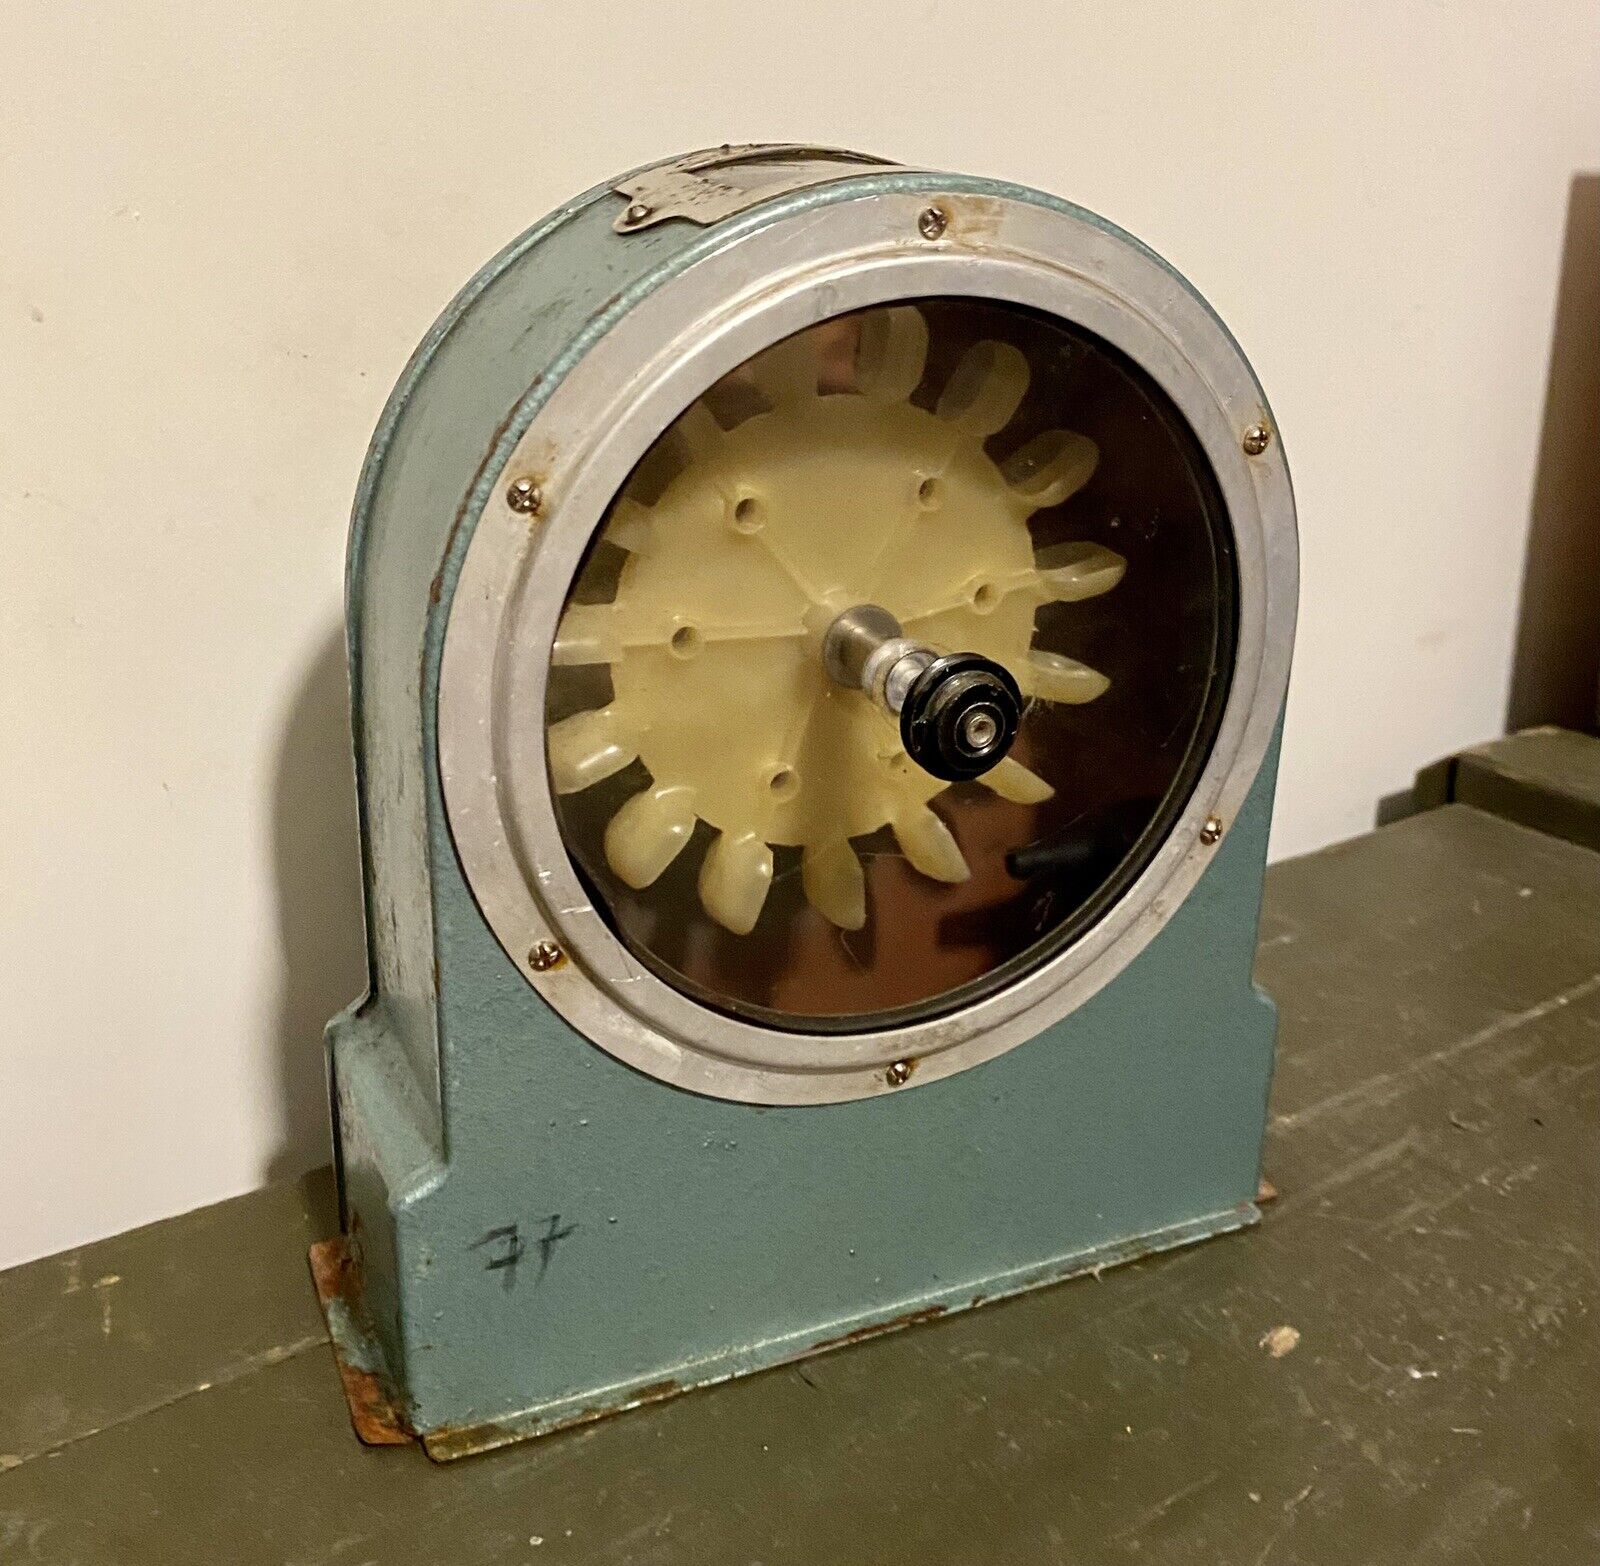 Vintage Water turbine model made in the USSR.